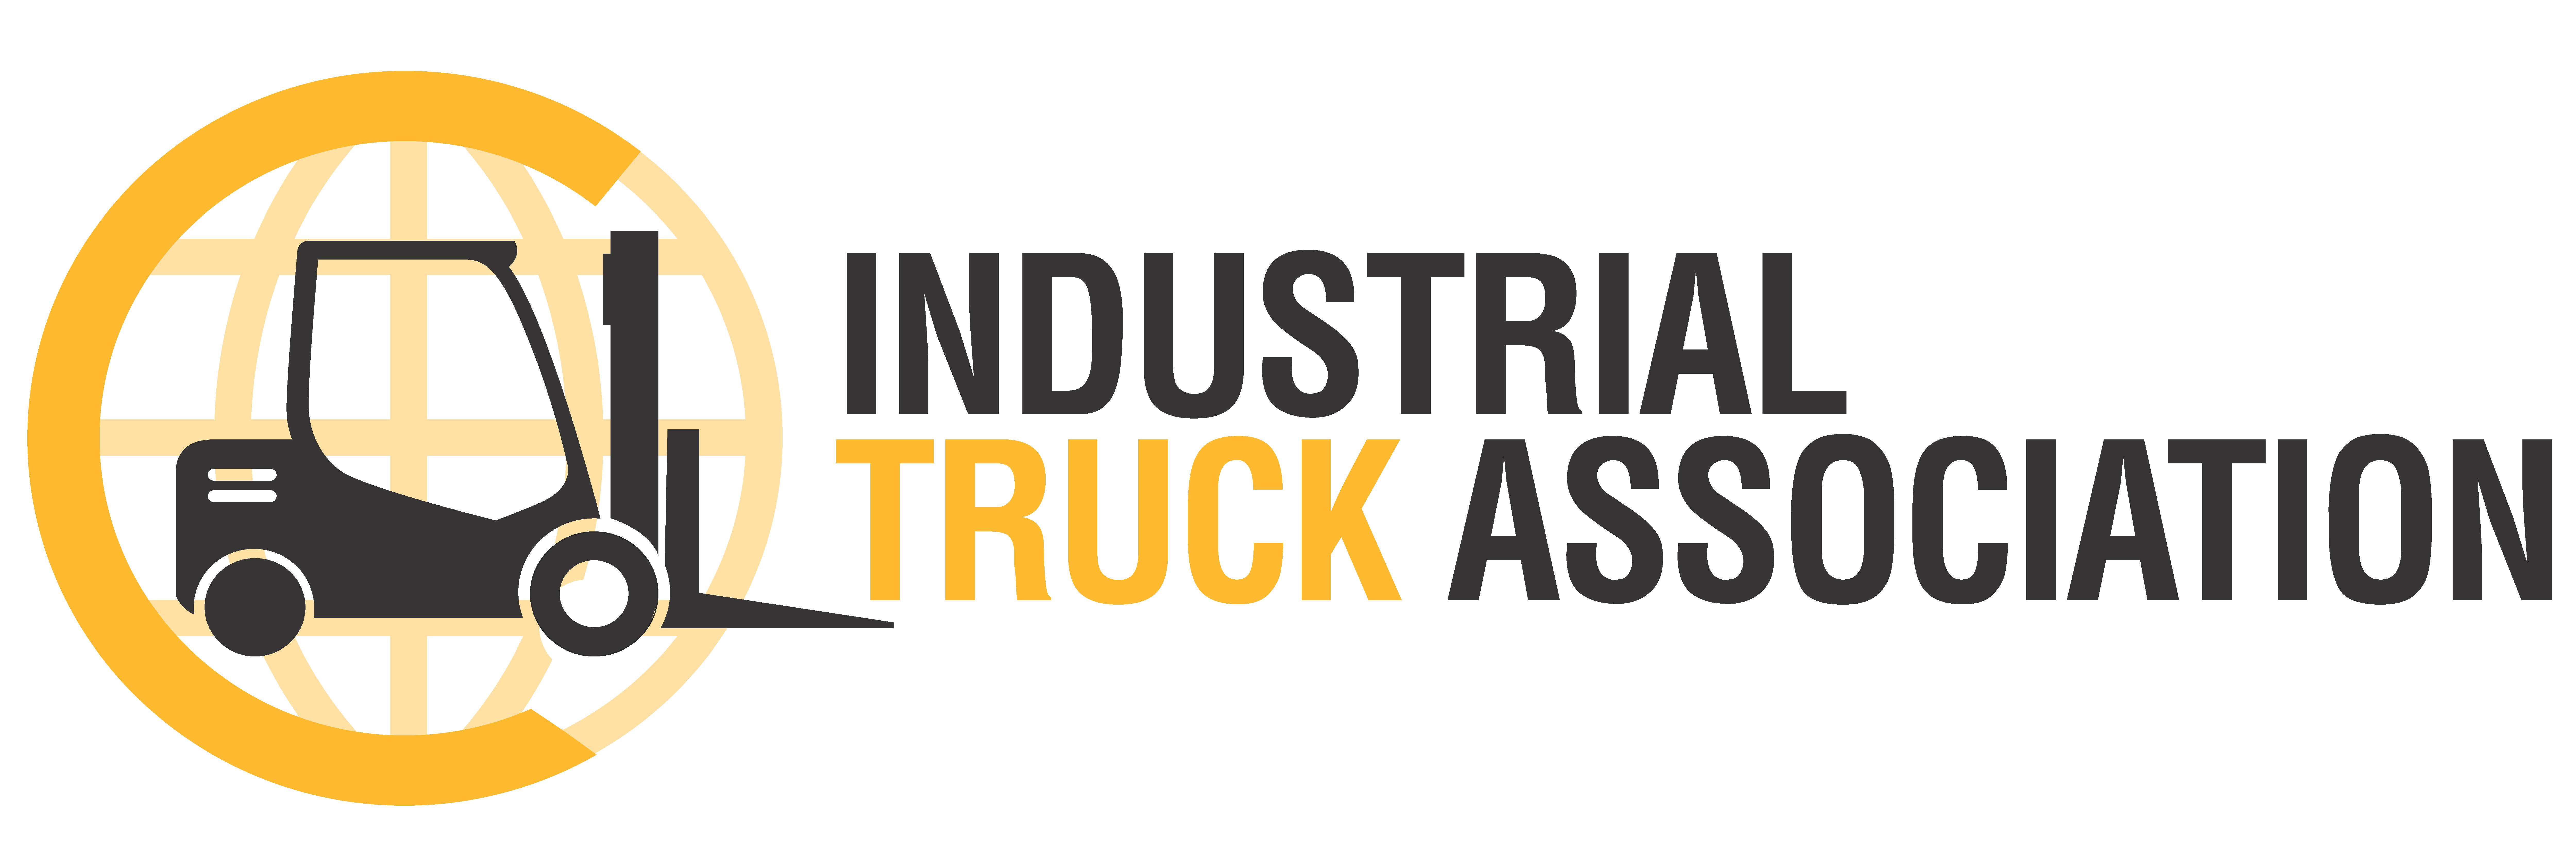 The Industrial Truck Association is the leading organization of industrial truck manufacturers and suppliers of component parts and accessories that conduct business in the U.S., Canada and Mexico.